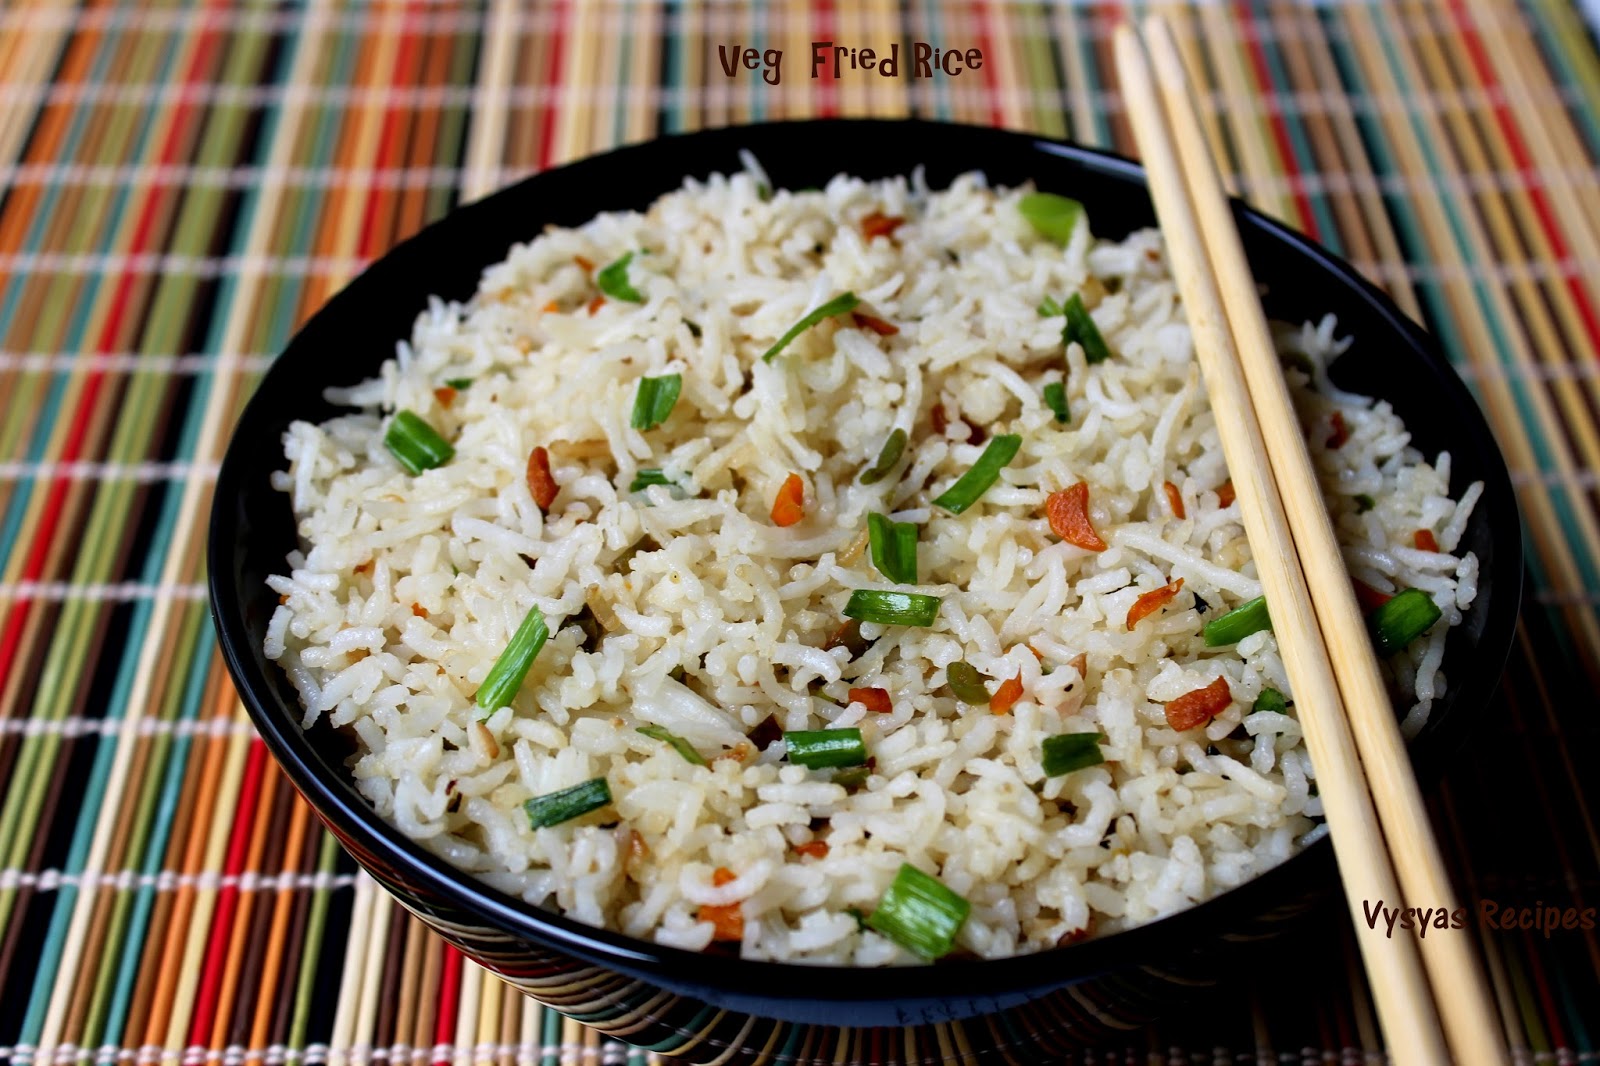 Vysya's Delicious Recipes: Veg Fried Rice - Easy Fried Rice - Vegetable